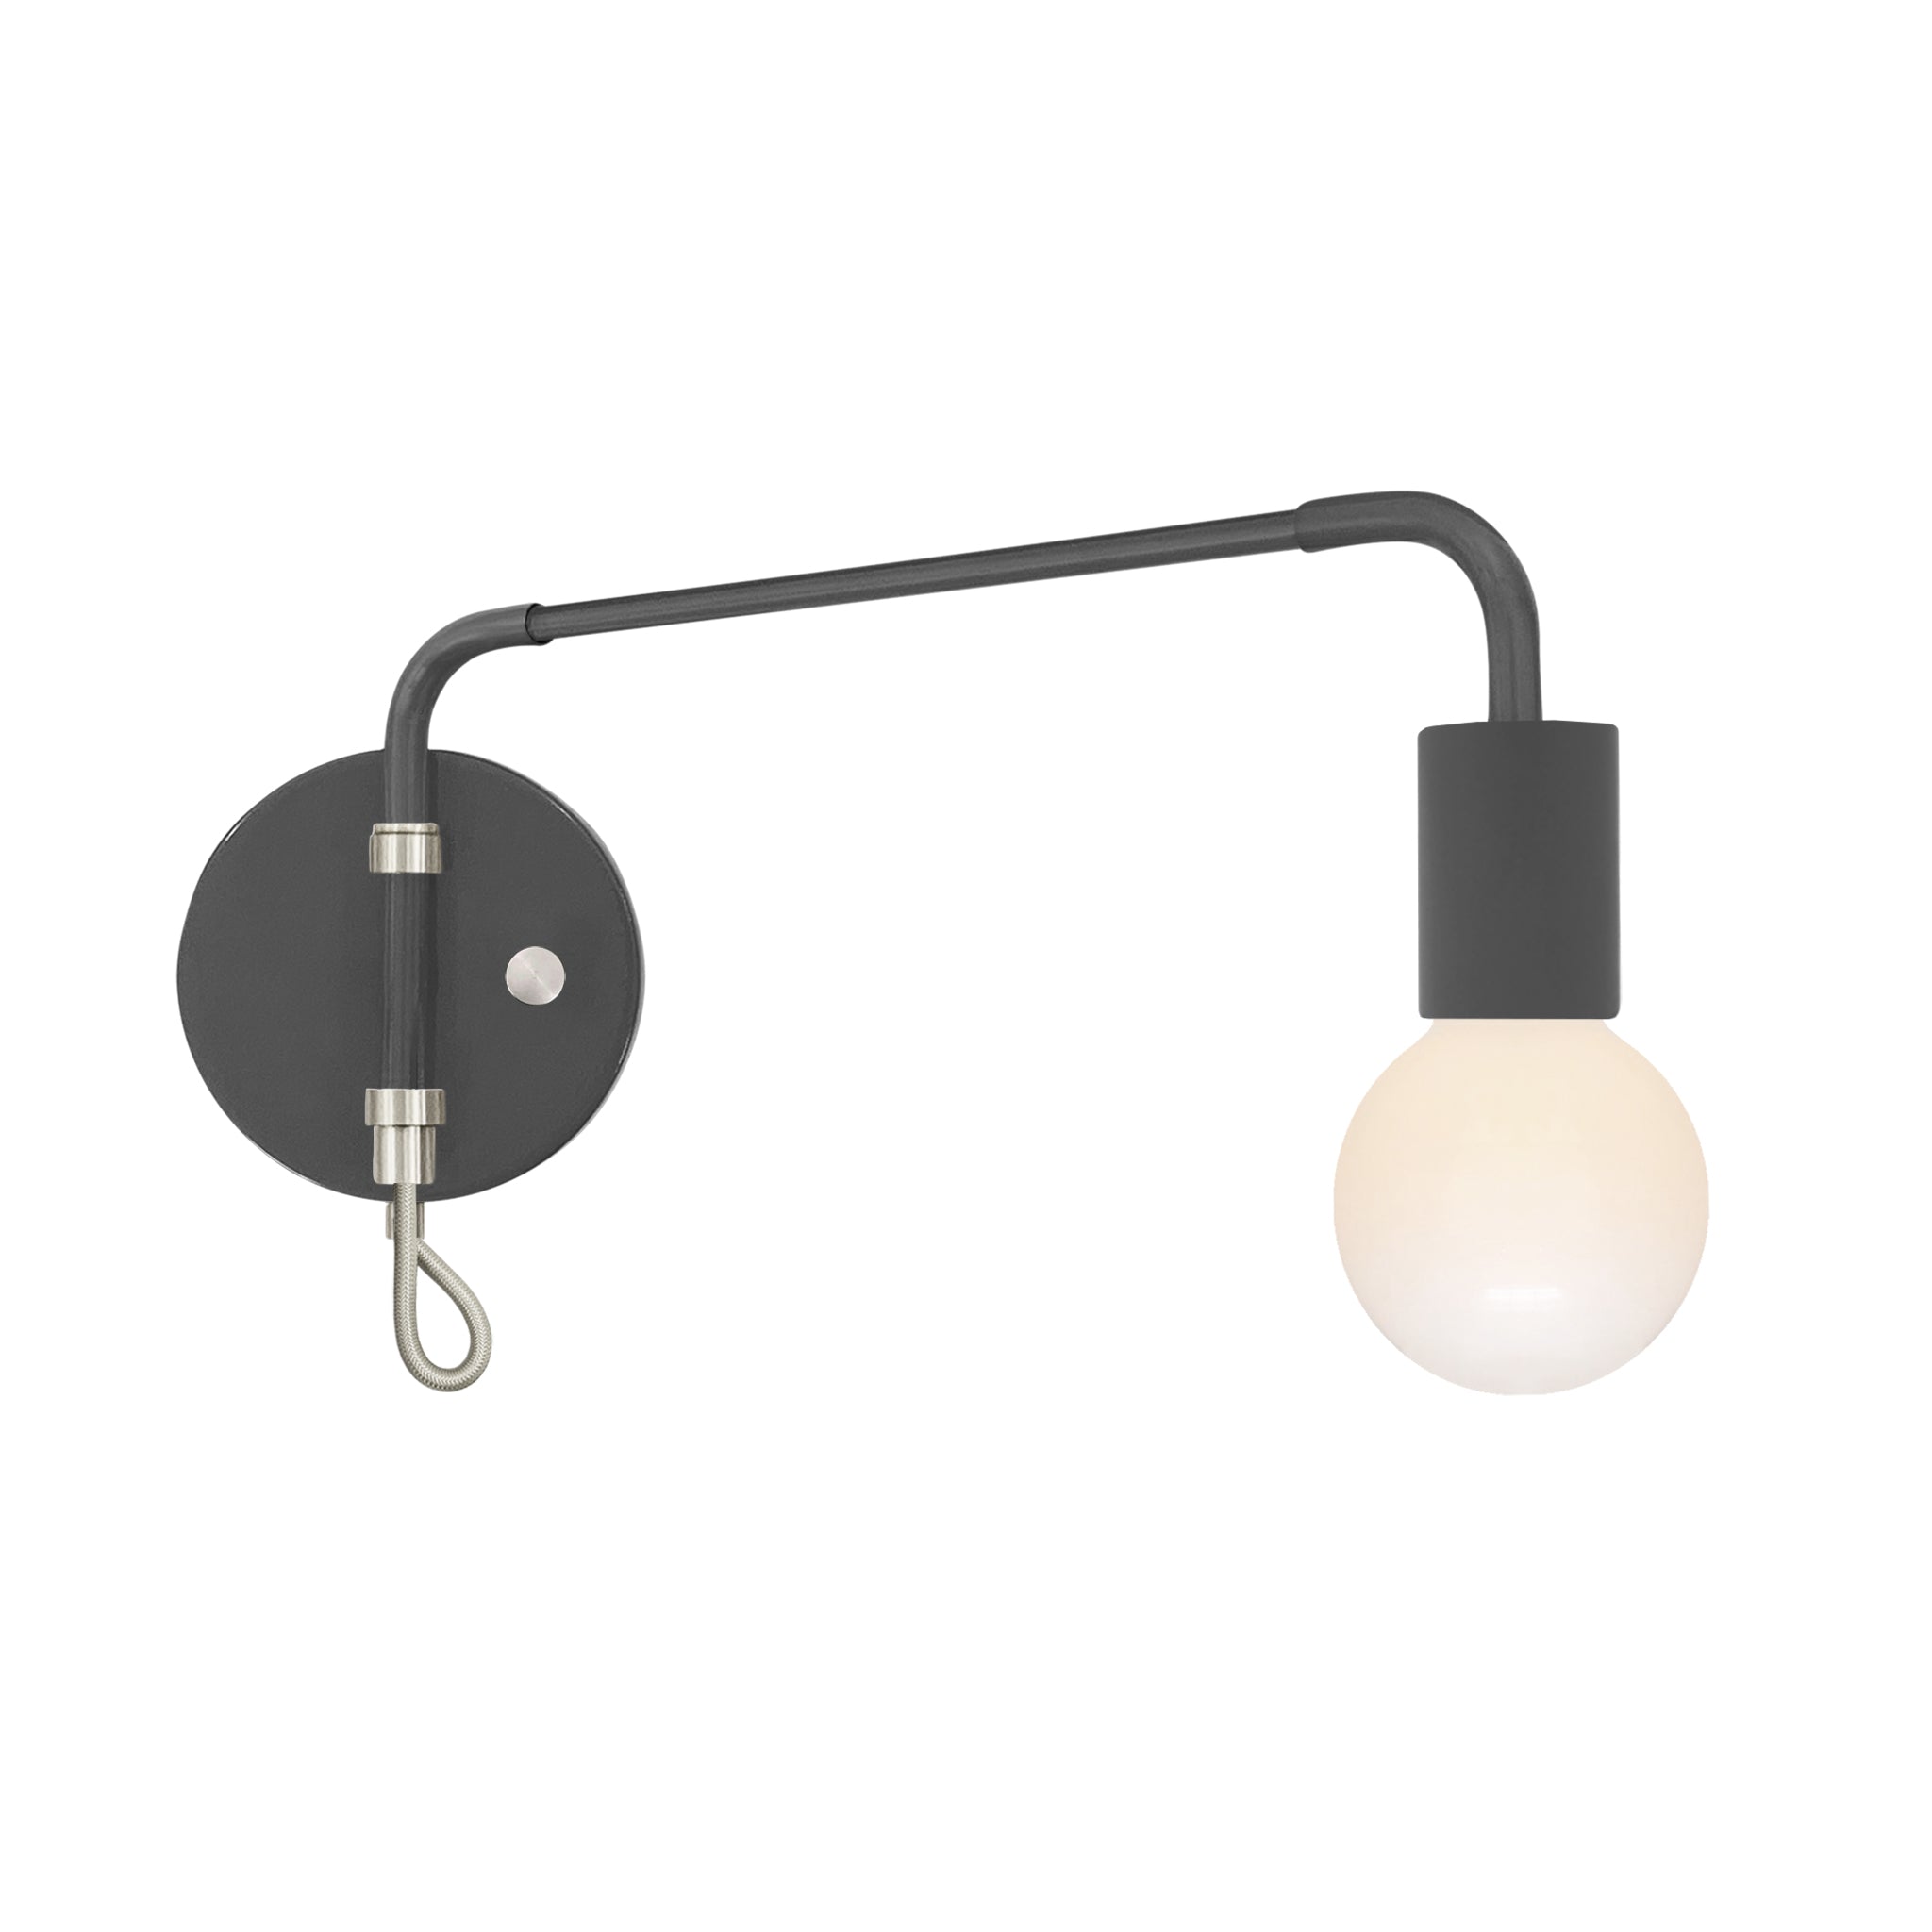 Nickel and charcoal color Sway sconce Dutton Brown lighting